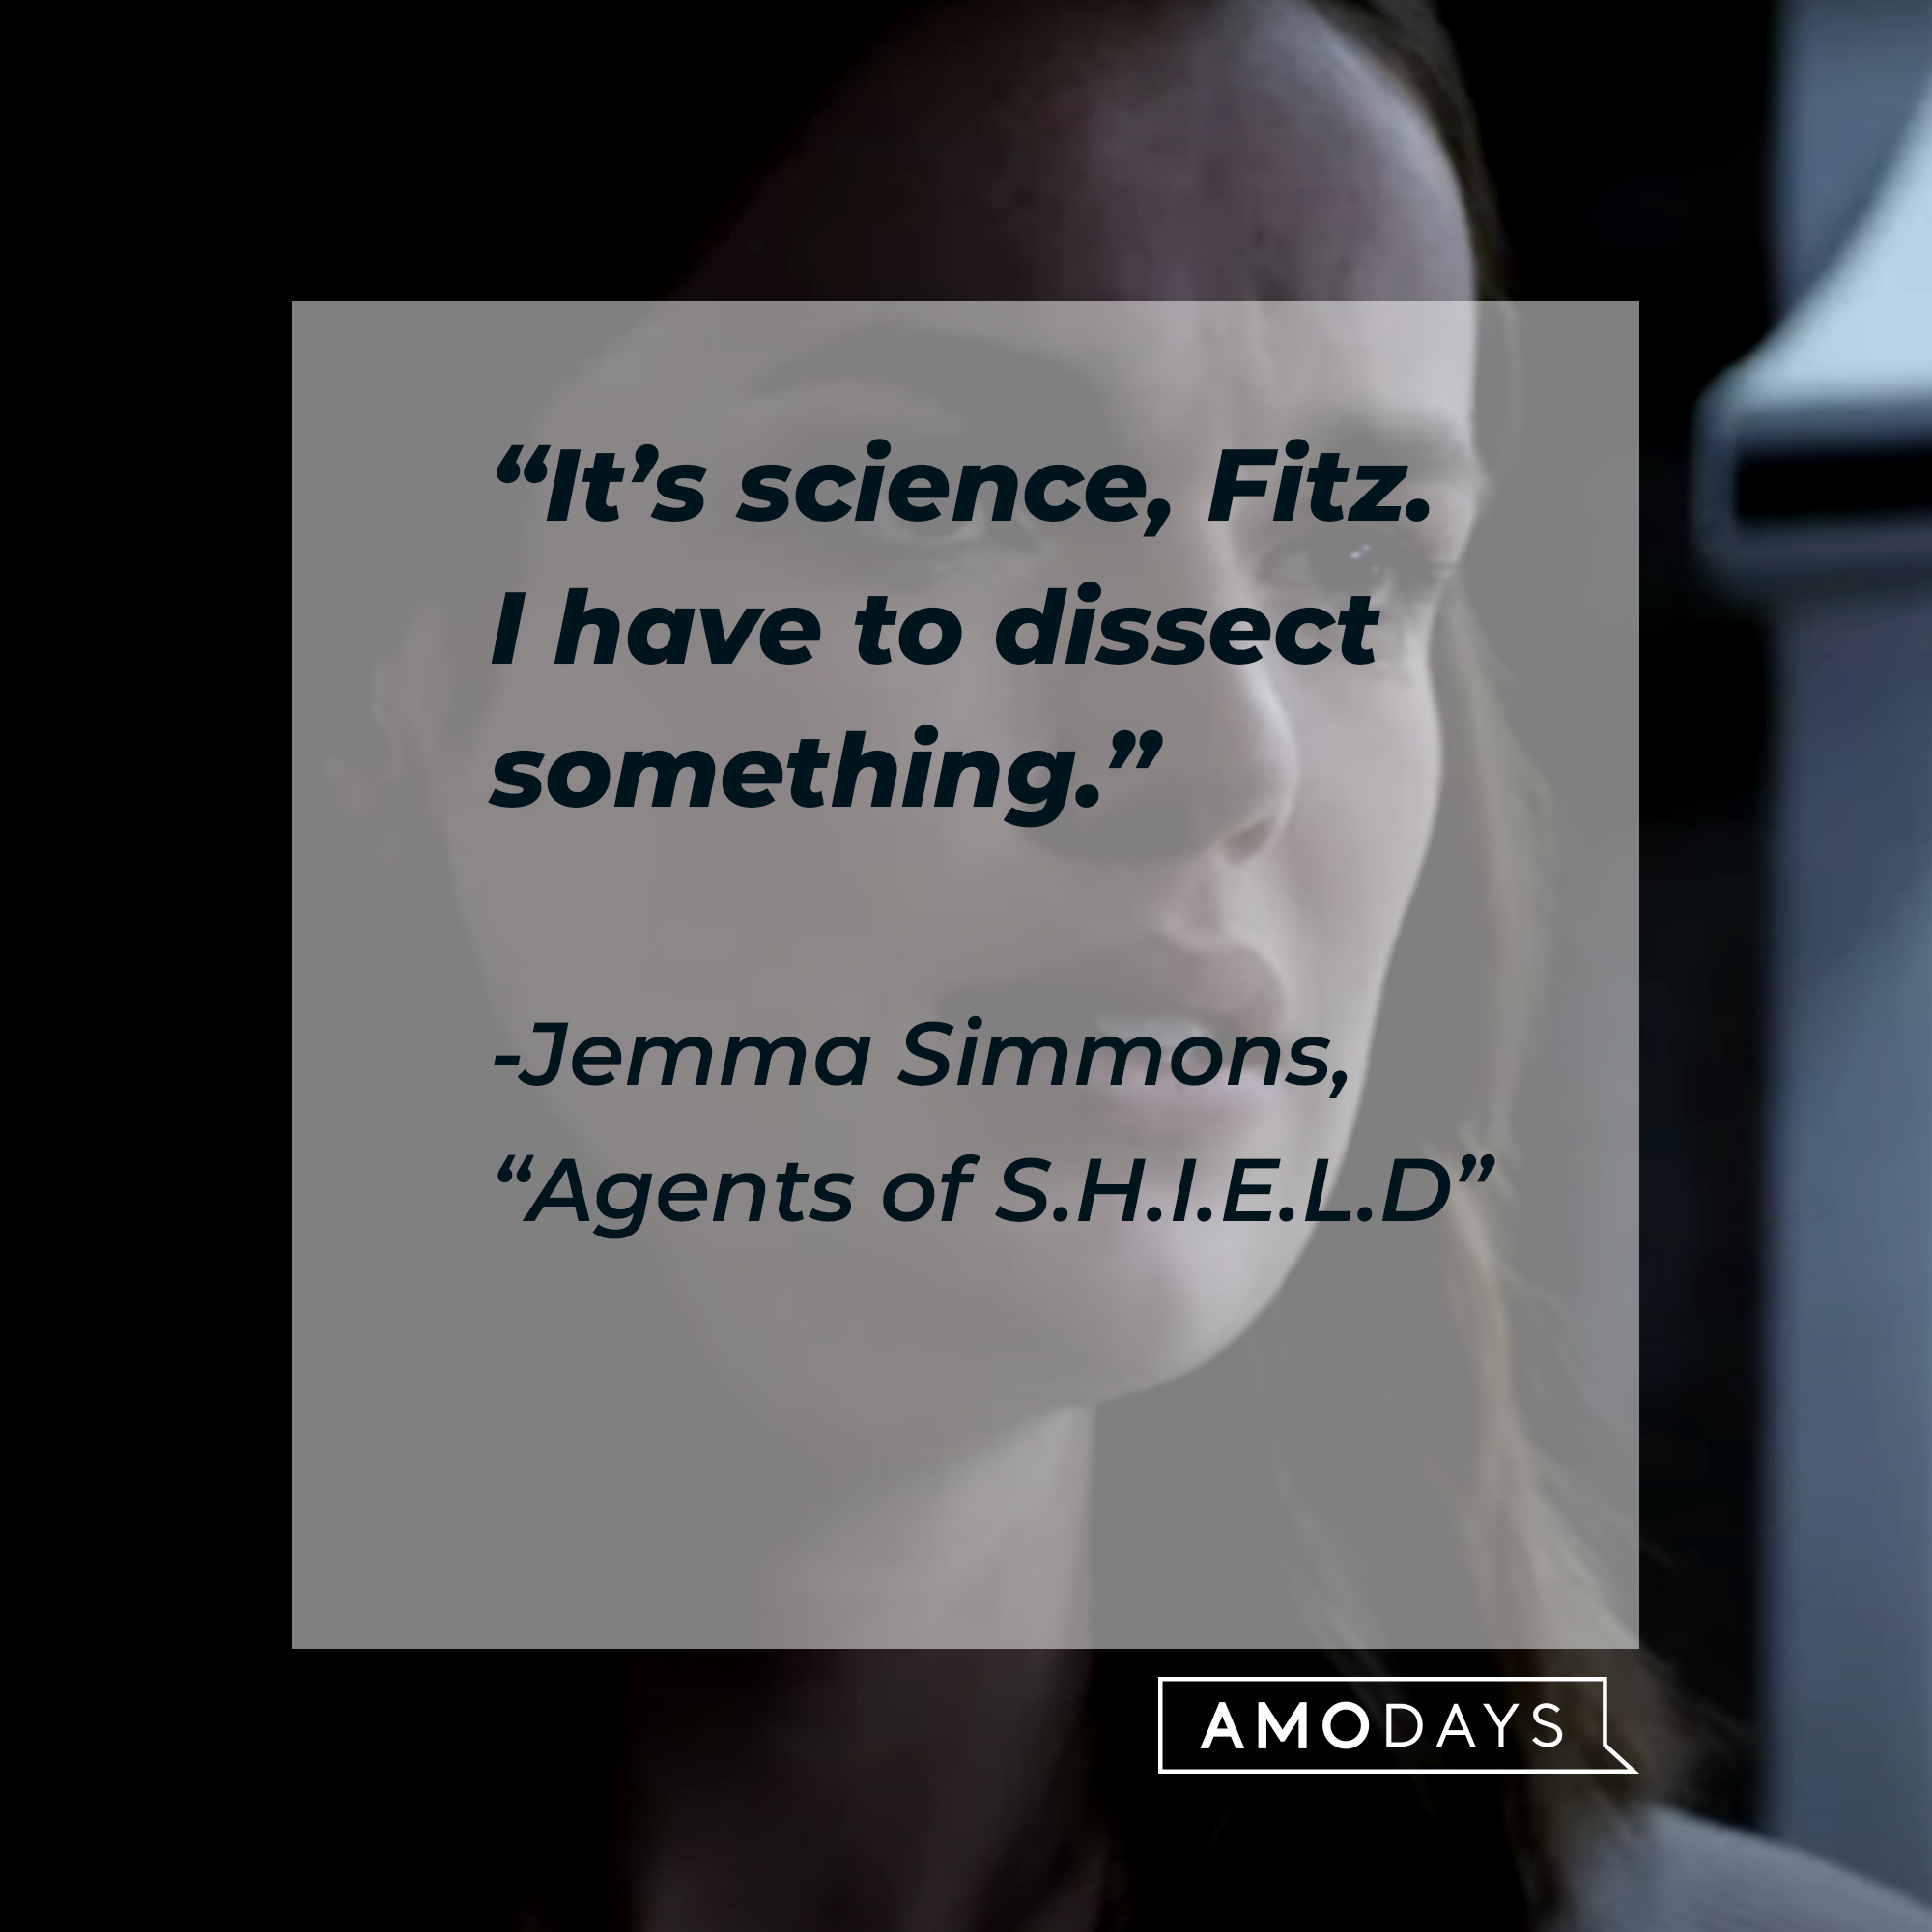 Jemma Simmons with her quote from "Agents of S.H.I.E.L.D.:" “It’s science, Fitz. I have to dissect something.” | Source: Facebook.com/AgentsofShield